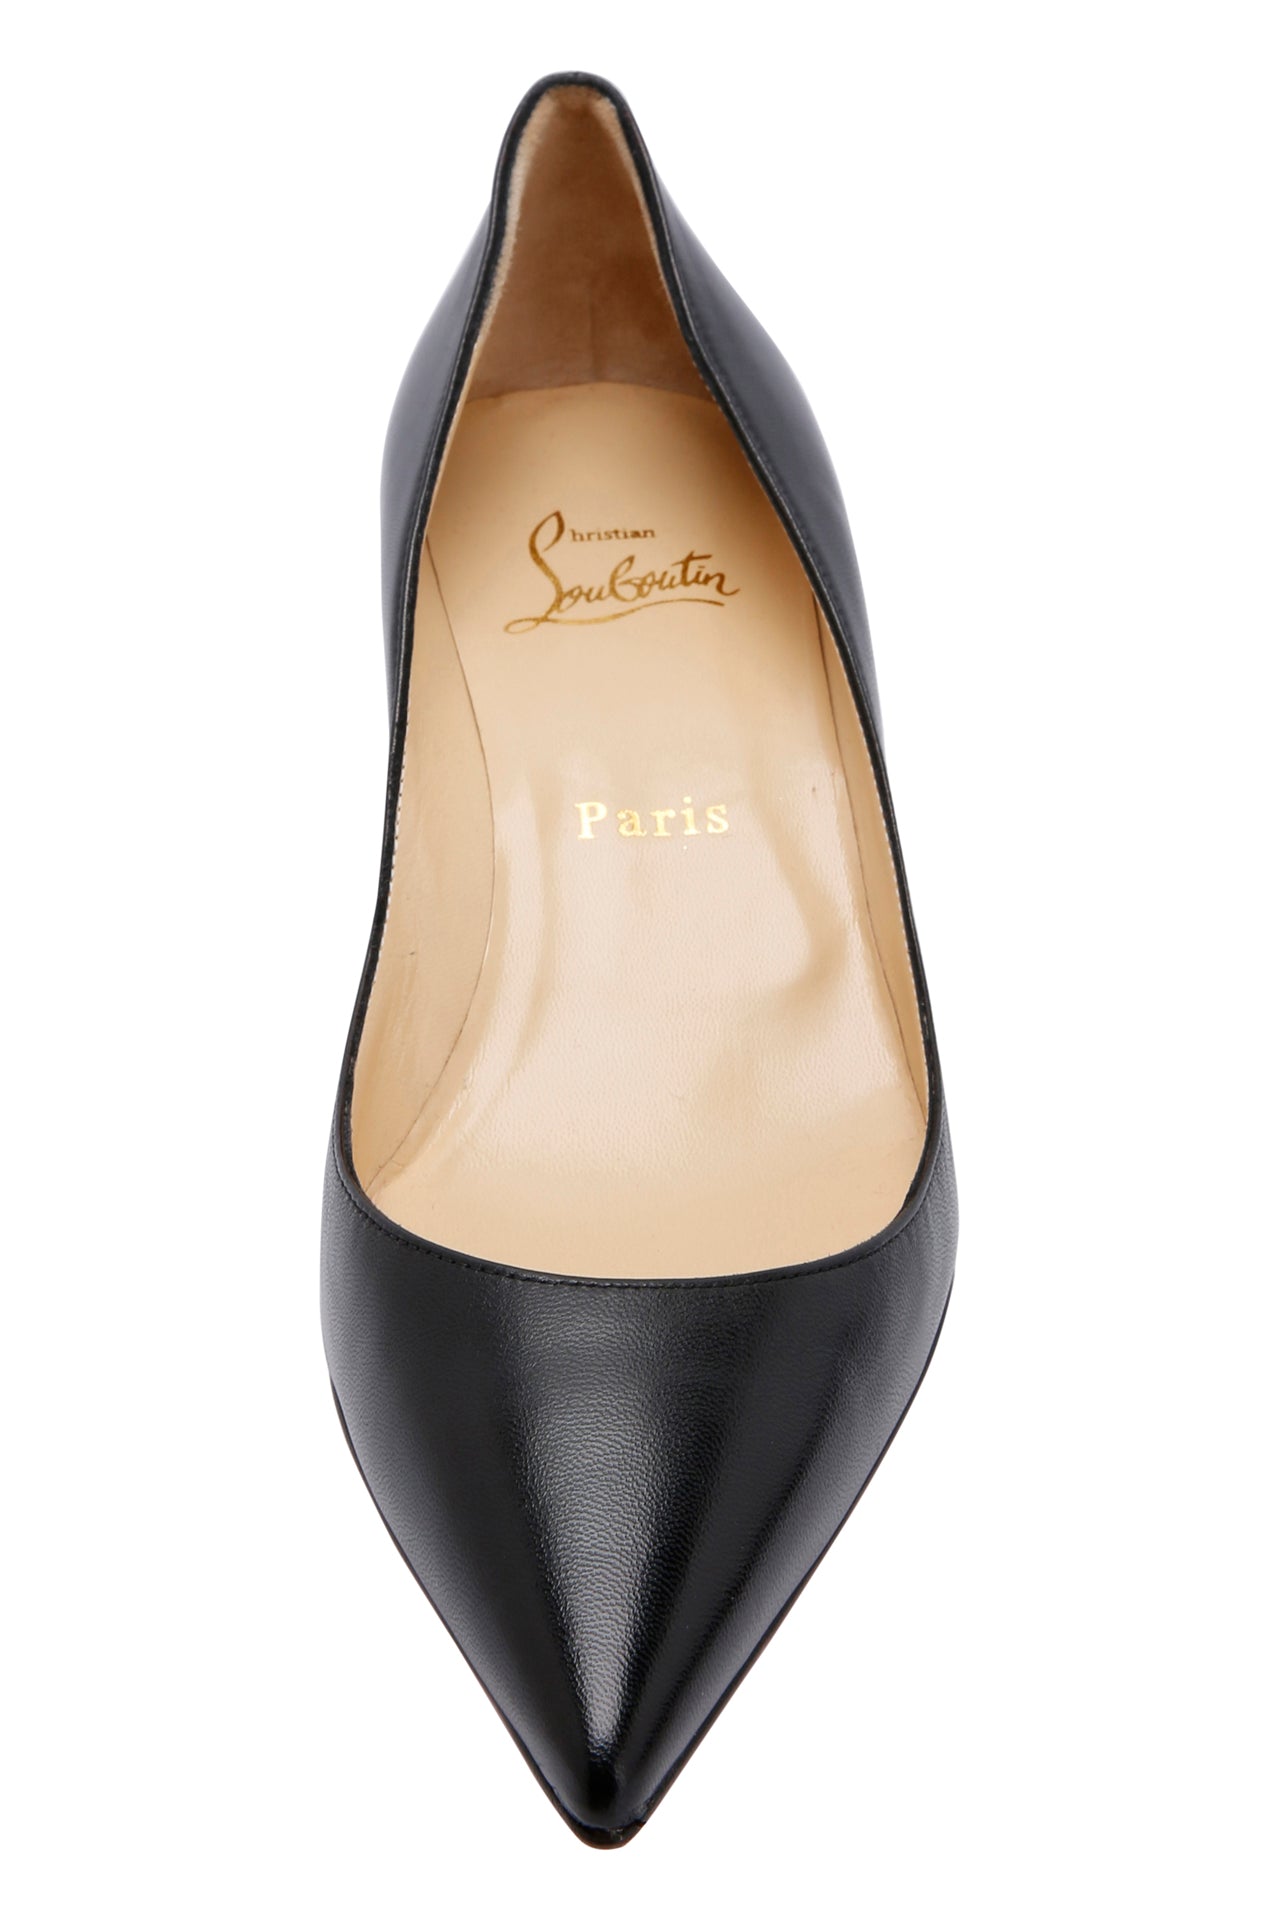 Christian Louboutin Black Patent Leather Pigalle Pointed Toe Pumps Size EU 38.5